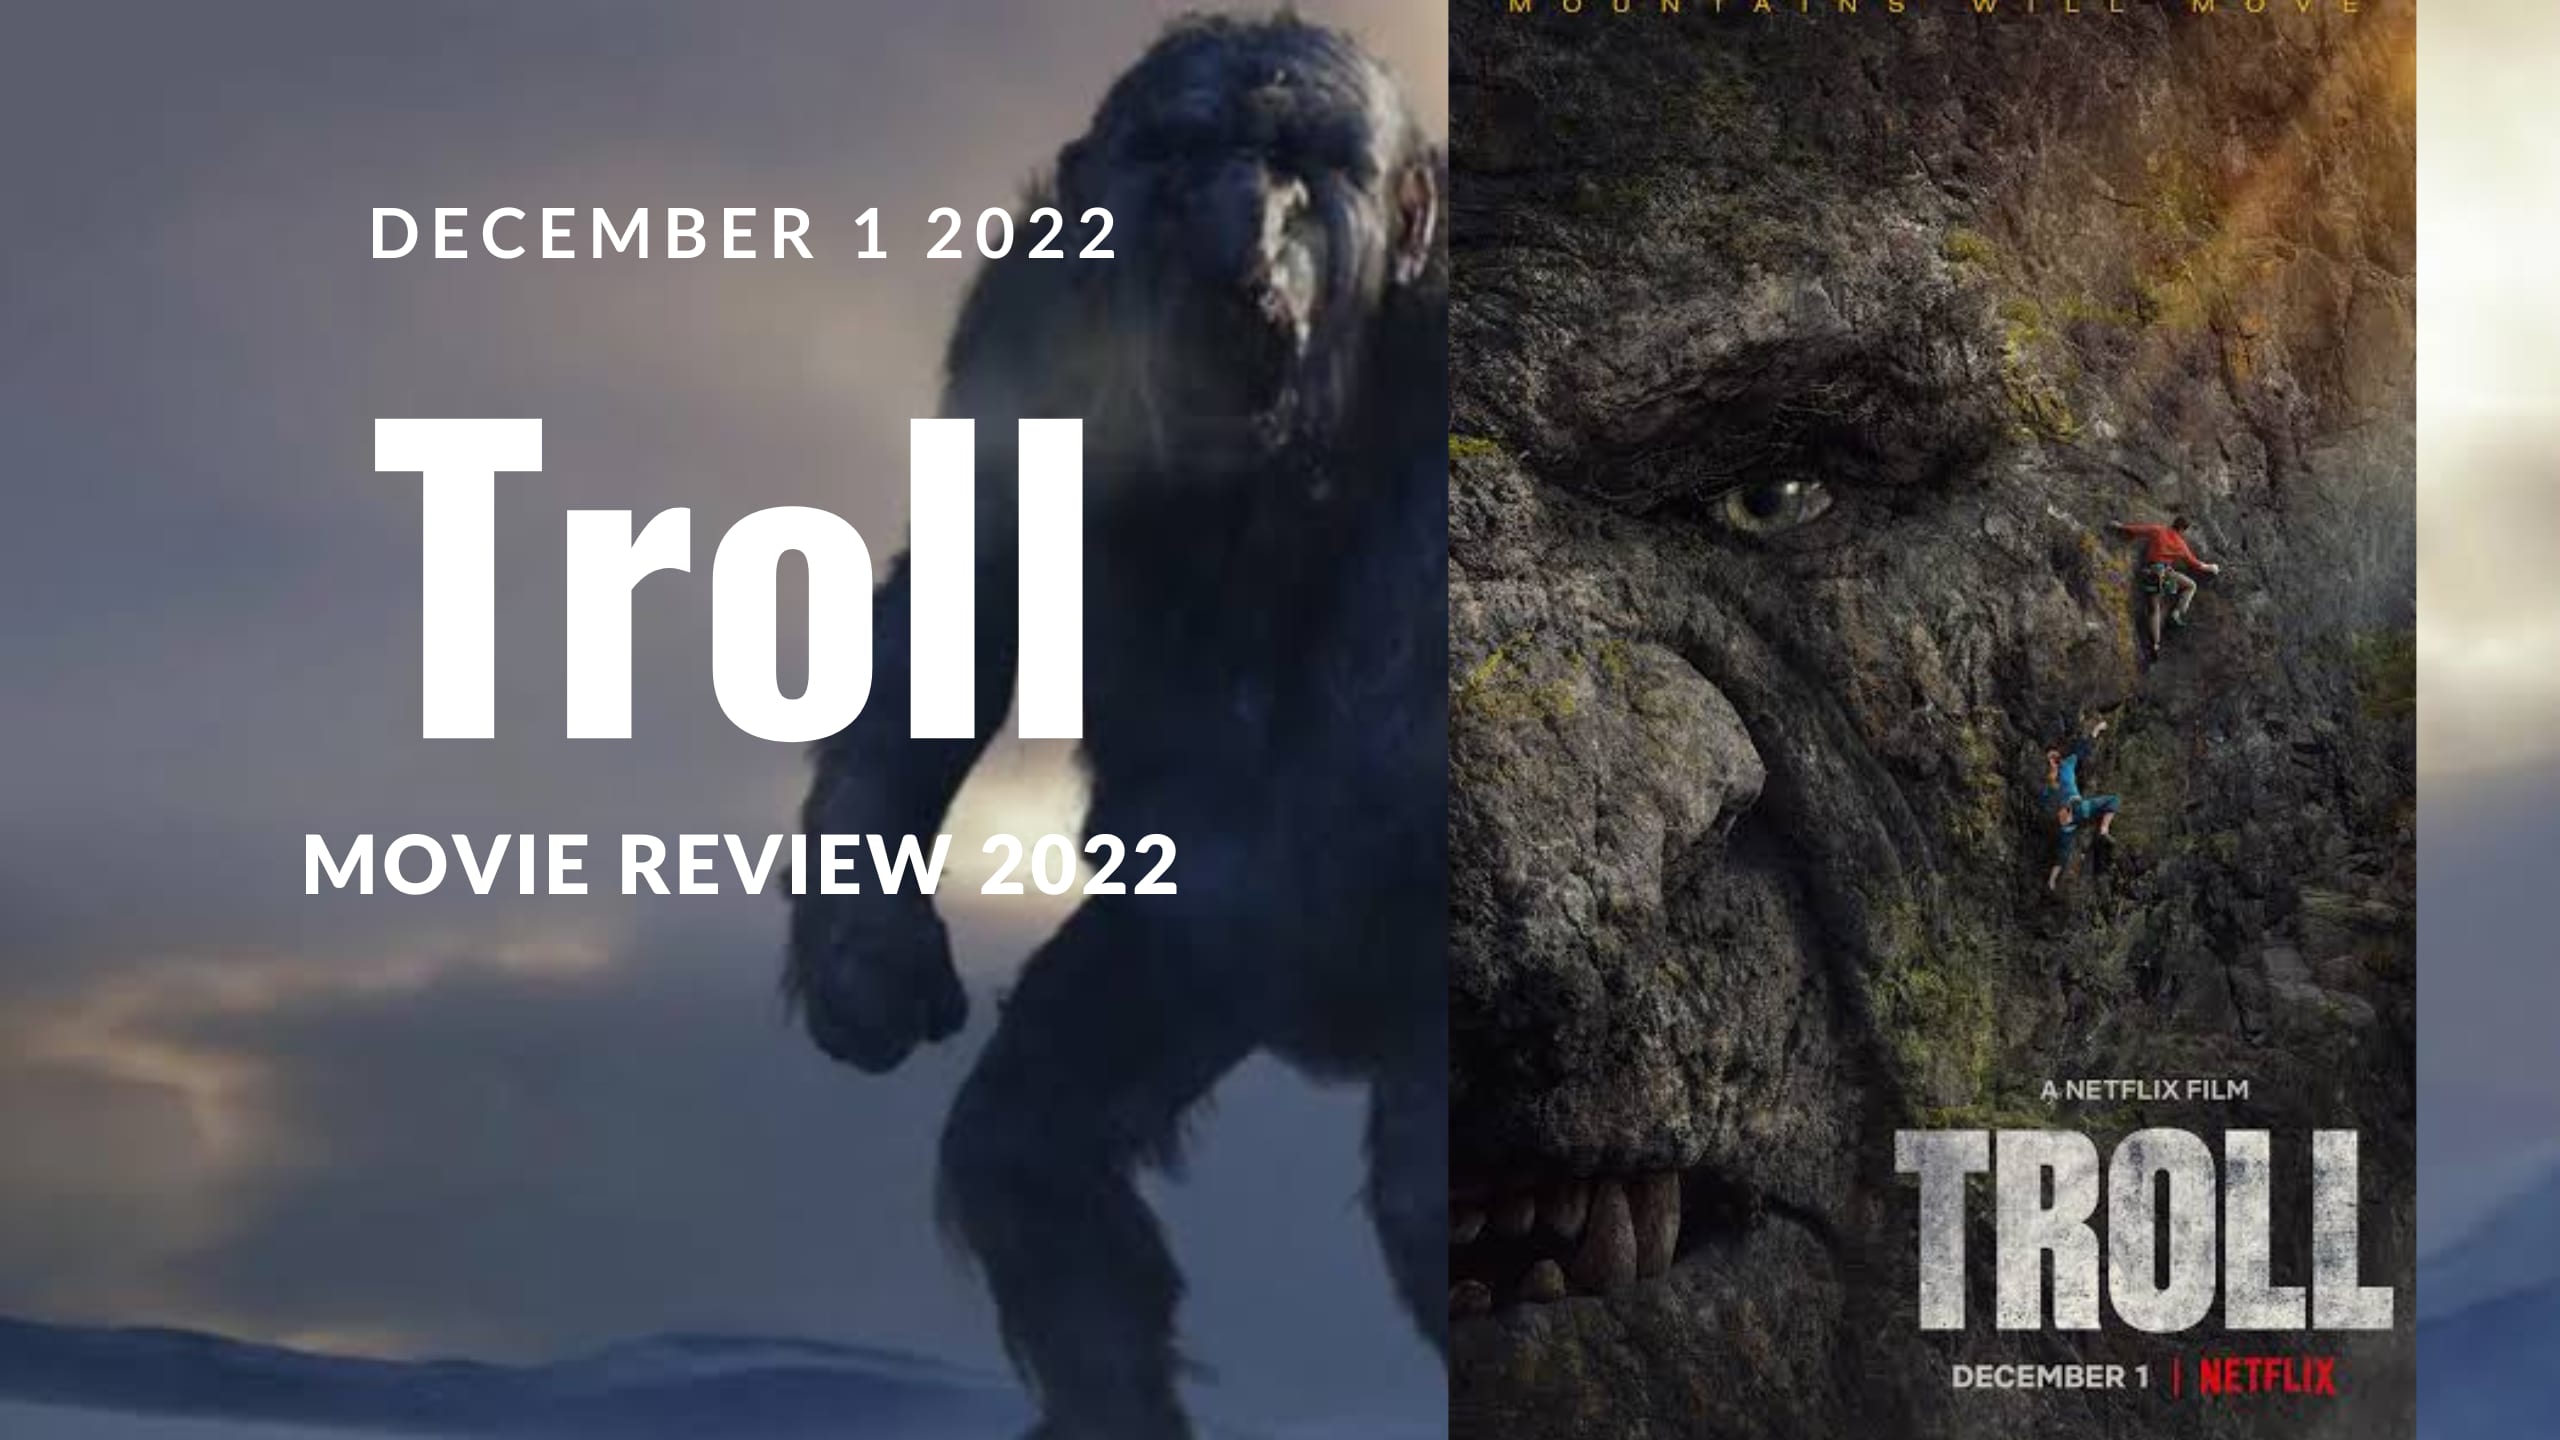 movie review of the troll